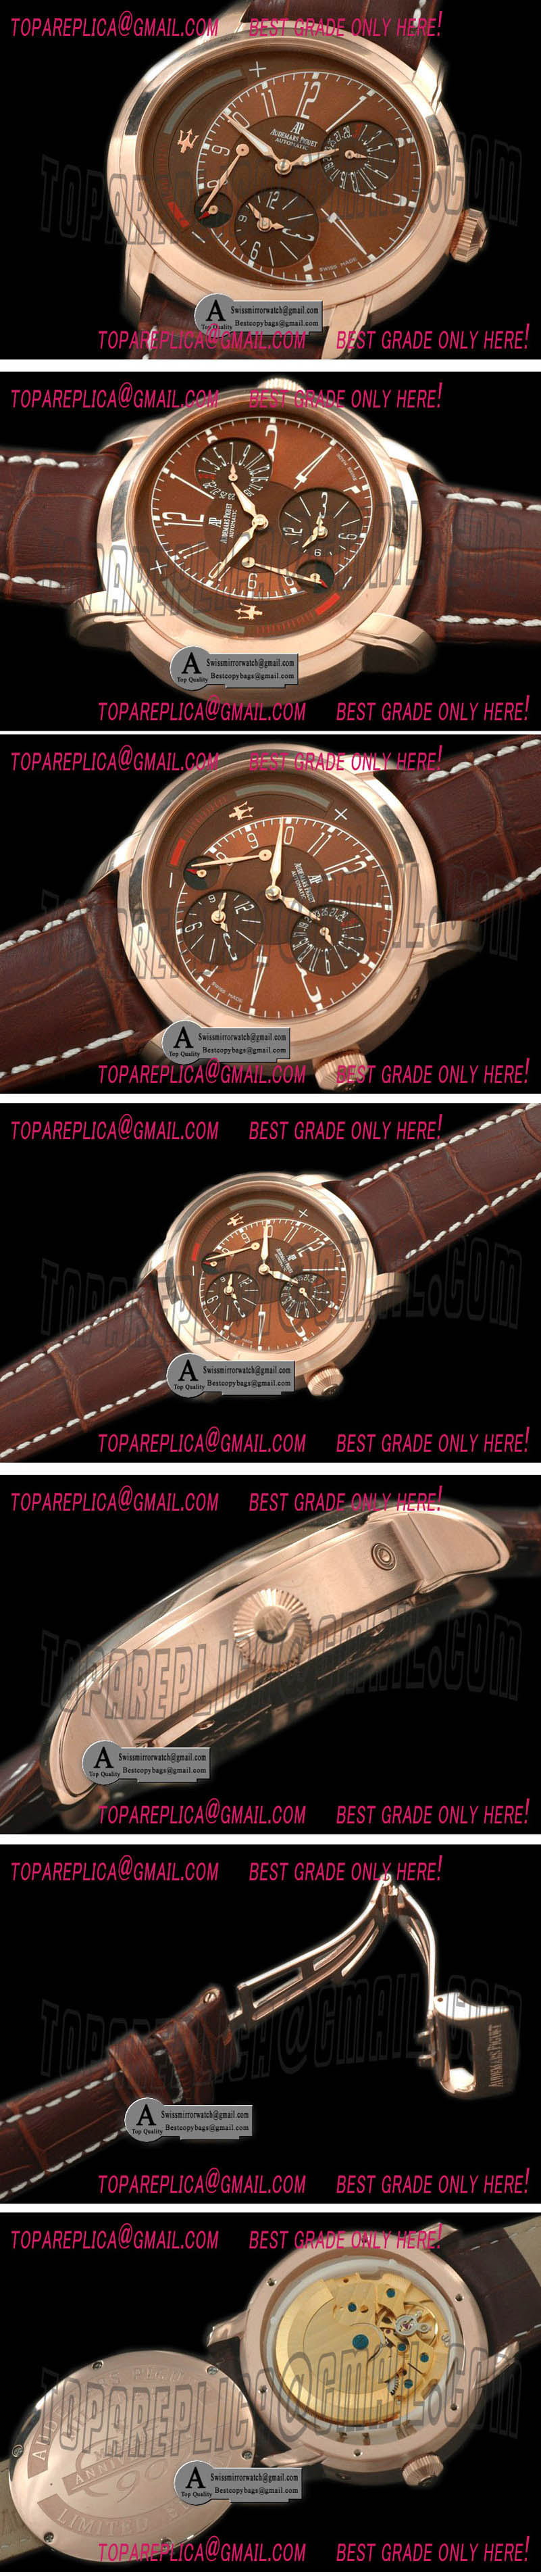 Audemars Piguet Millenary Reserve/Duo Time Rose Gold/Leather Brown Asian 23J Automatic Replica Watches